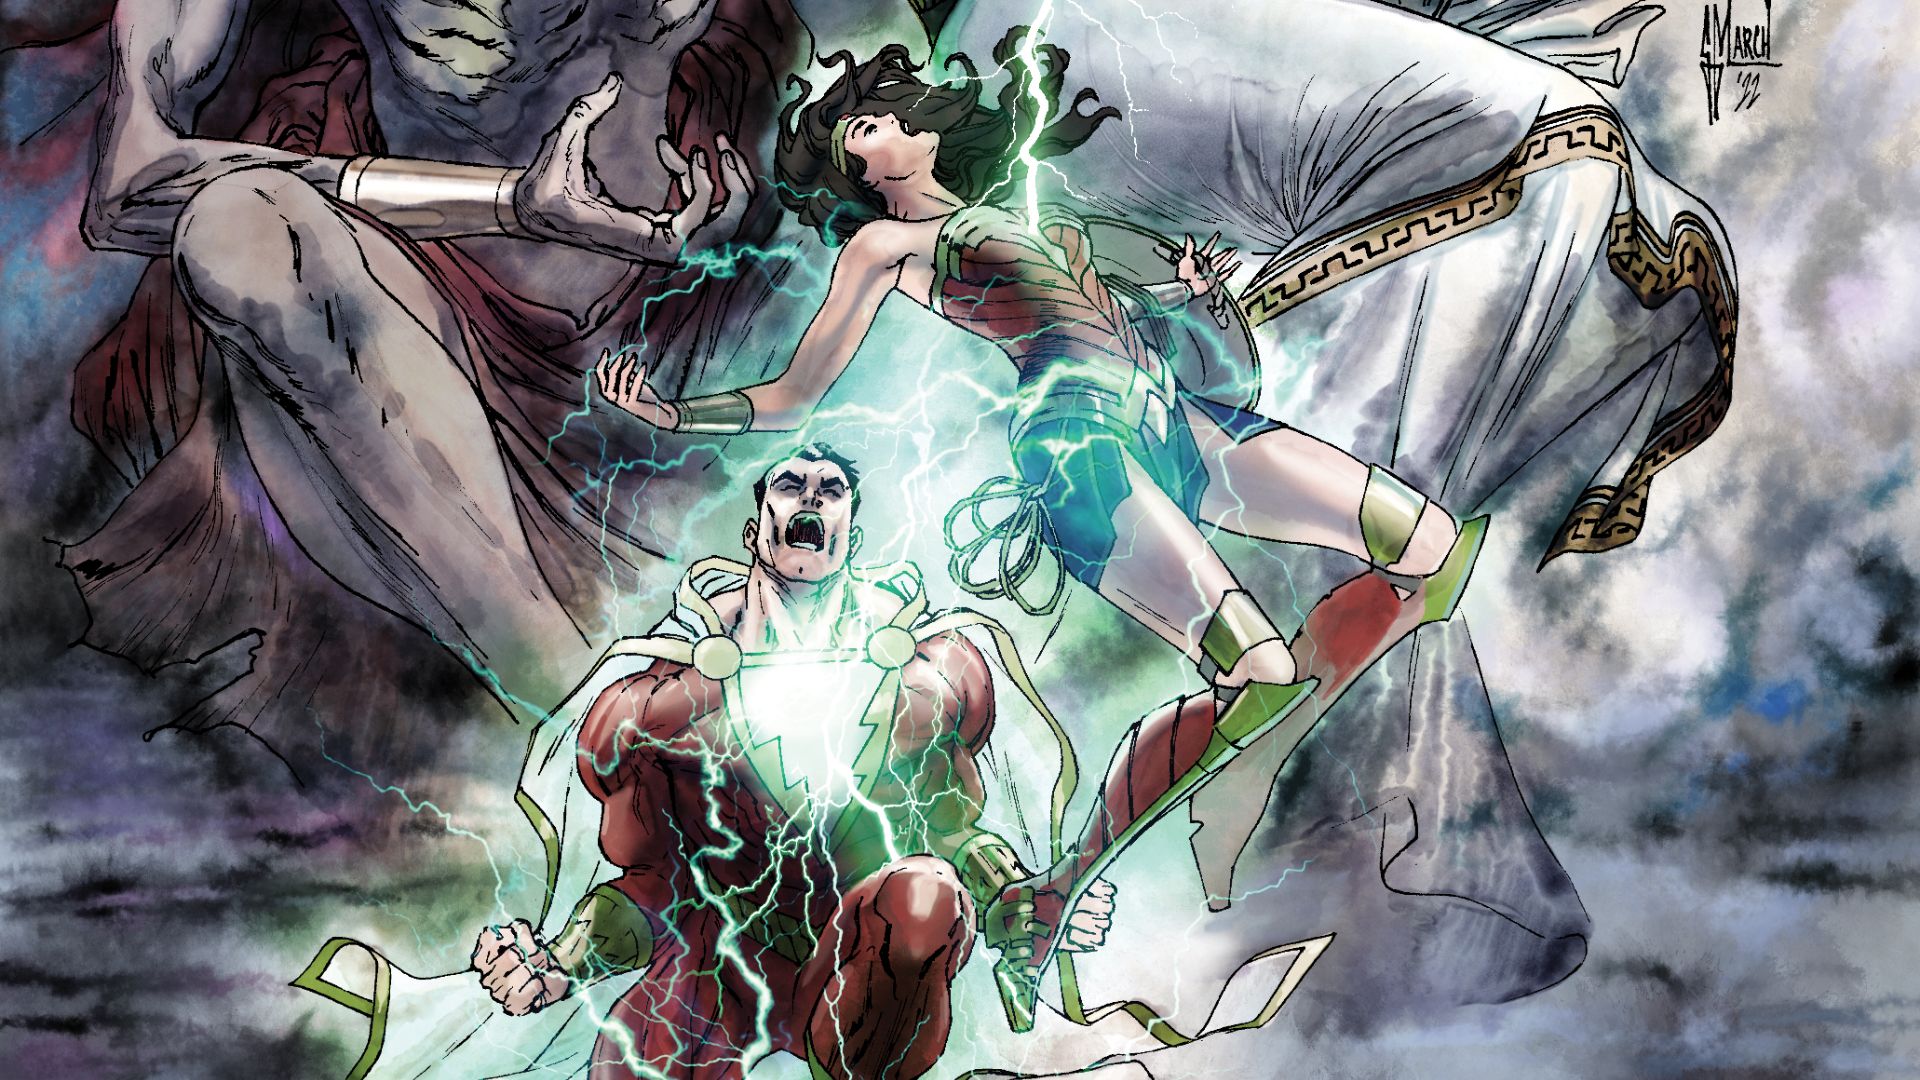 Wonder Woman And Shazam Get Their Own Lazarus Planet Spin Off Series Revenge Of The Gods